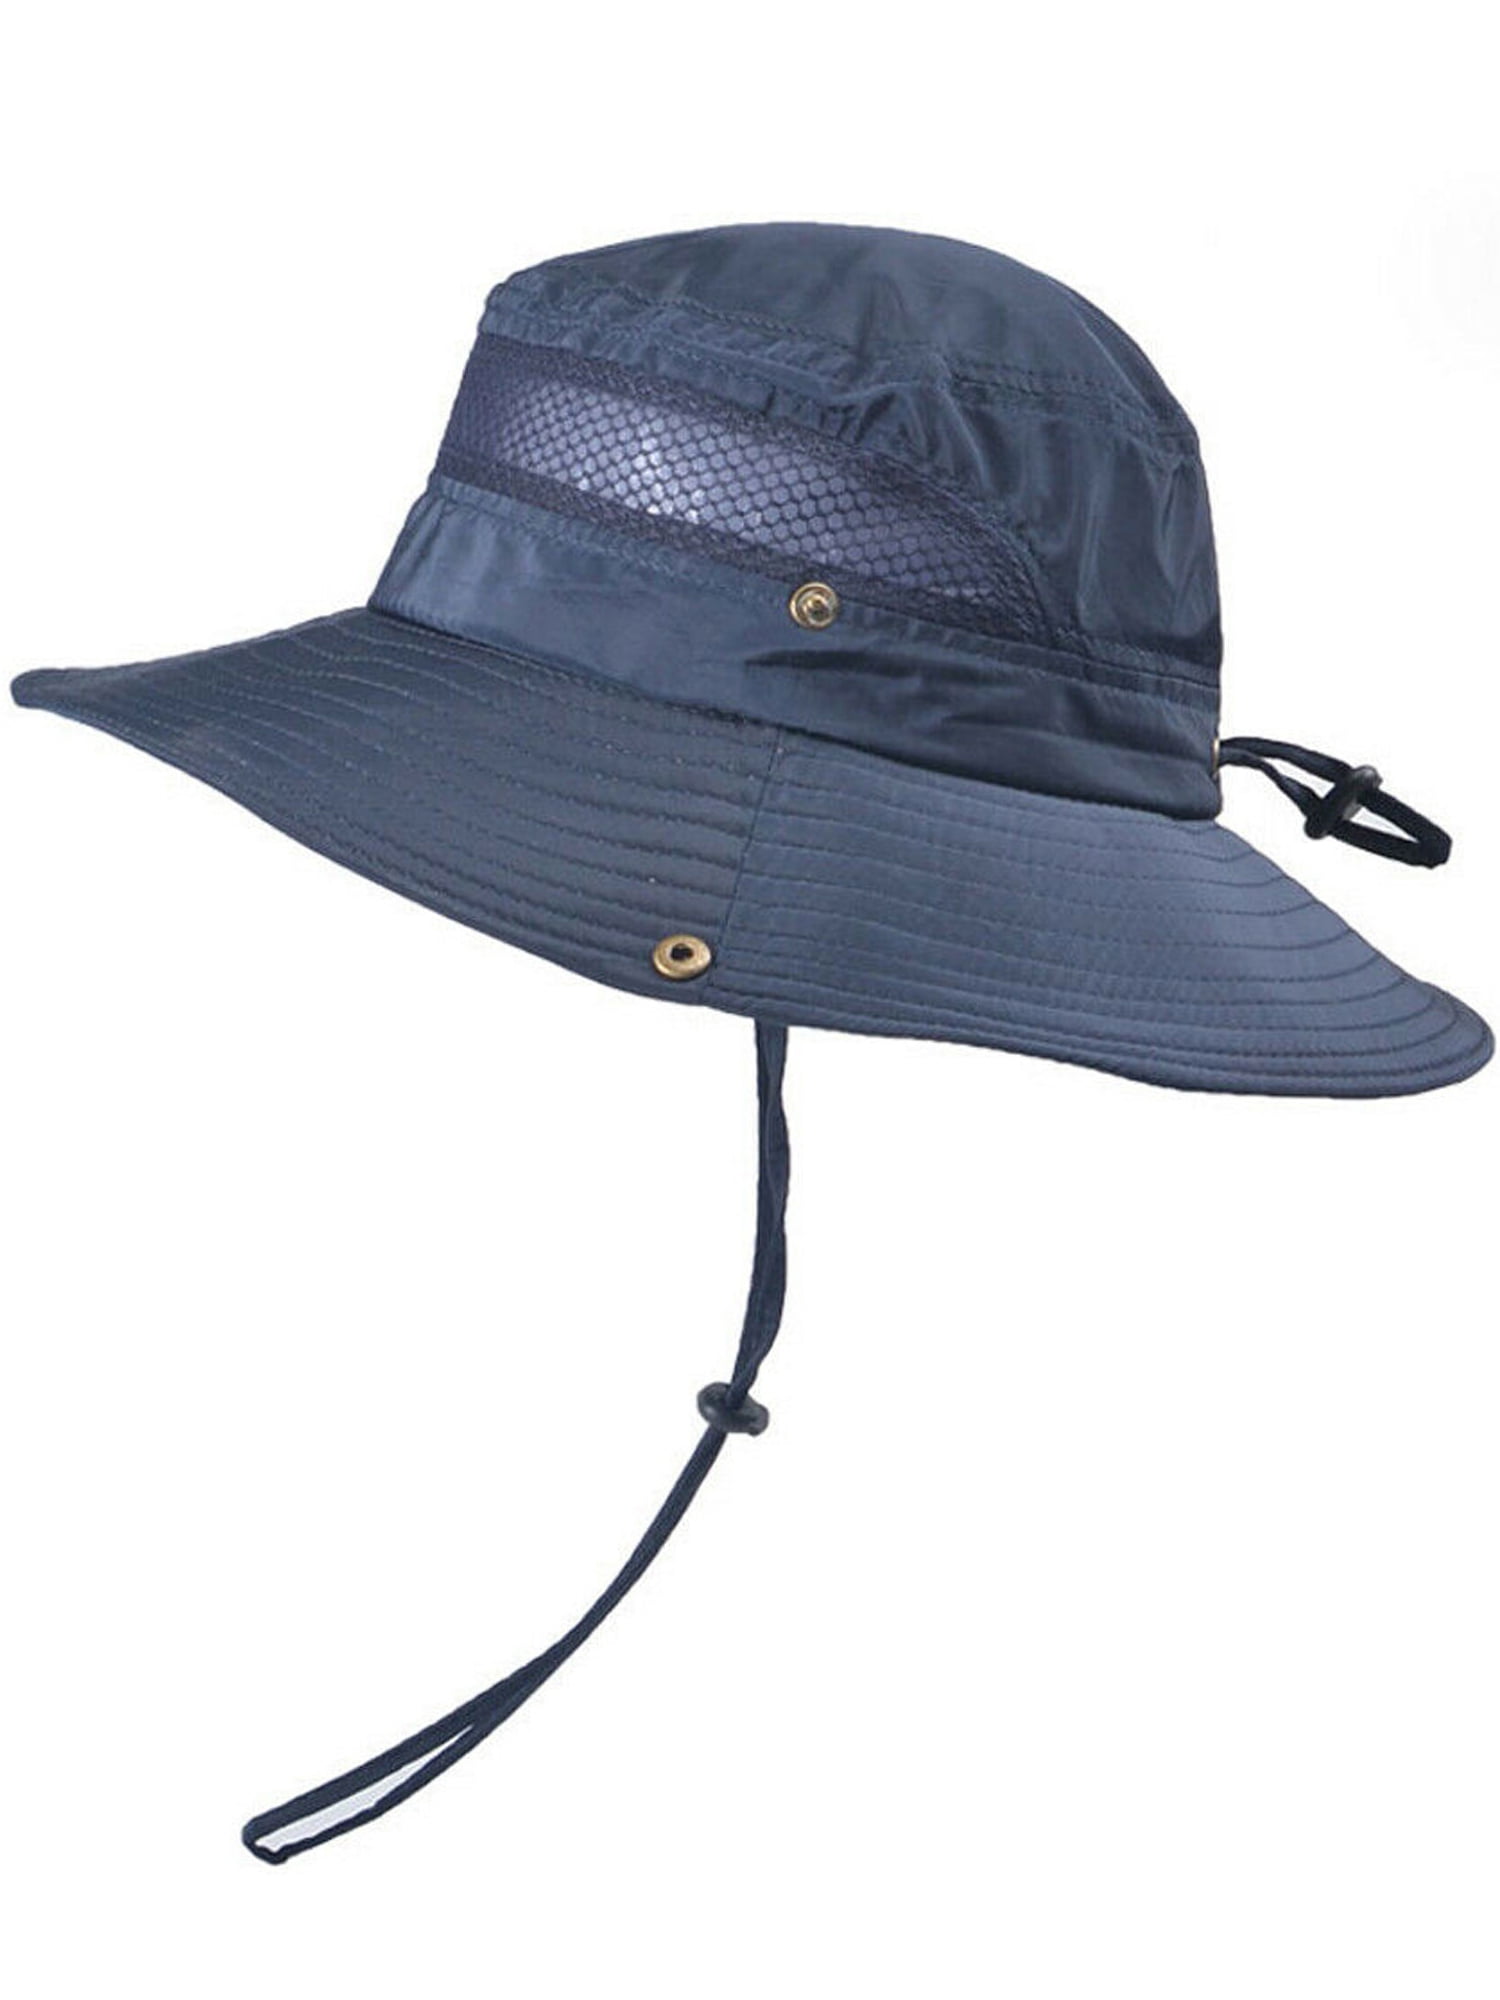 large size Everyday cotton summer hat 59-60cm